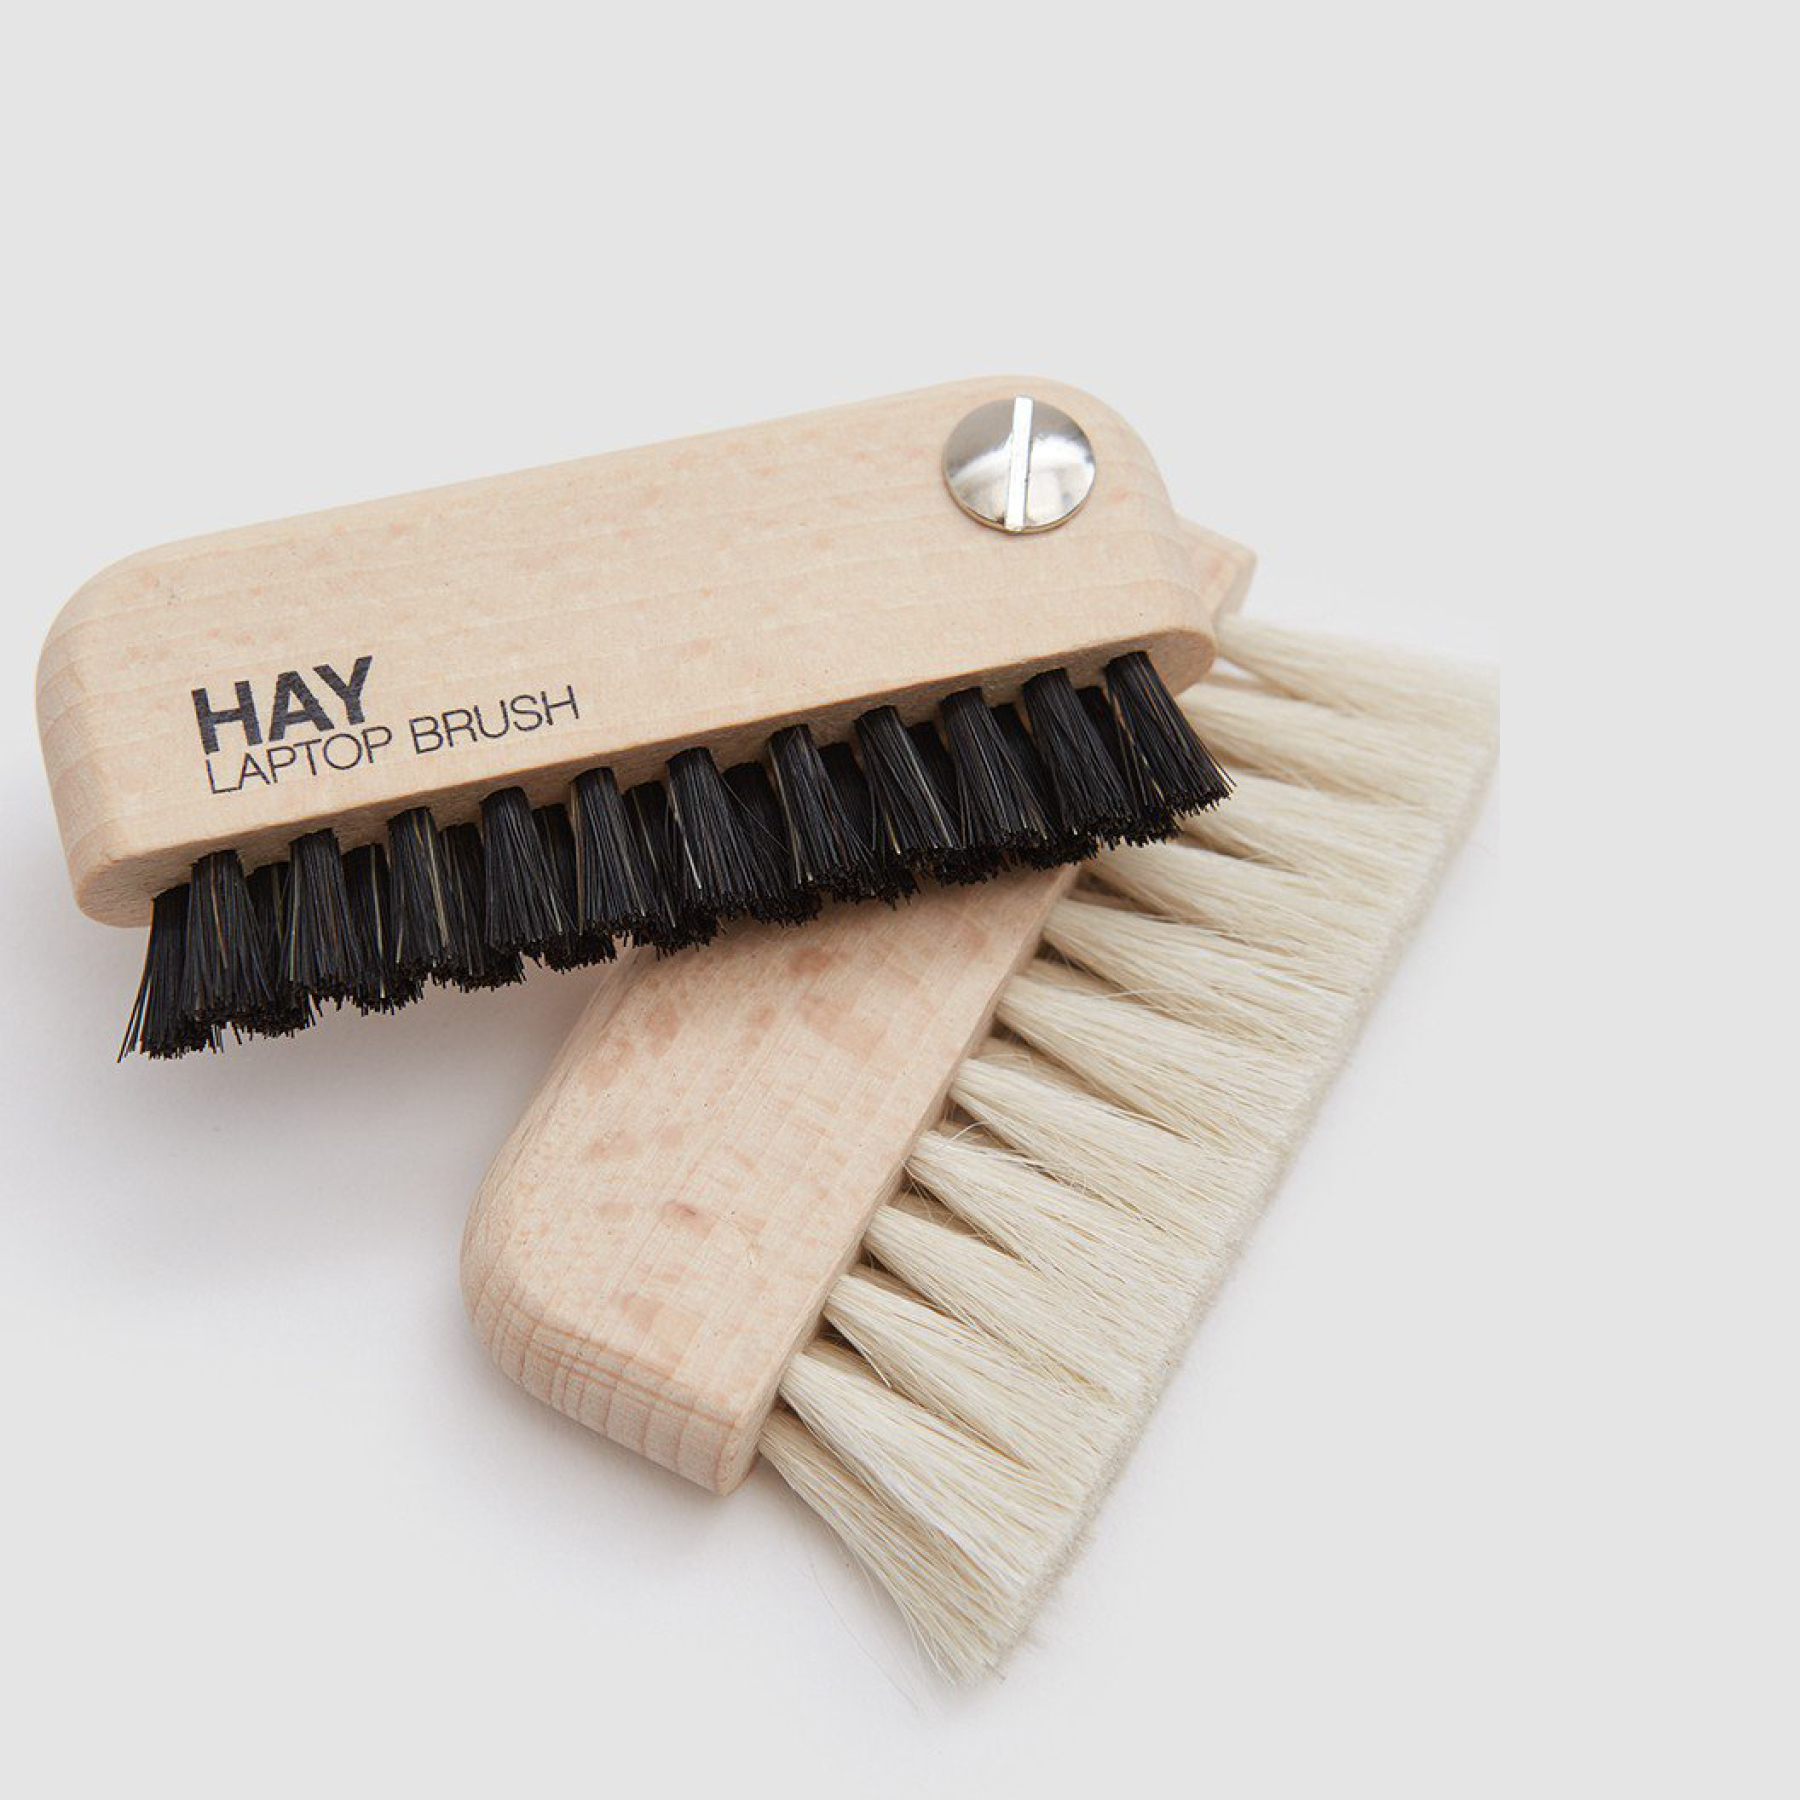 ALL-SORTS-OF-LAPTOP-BRUSH